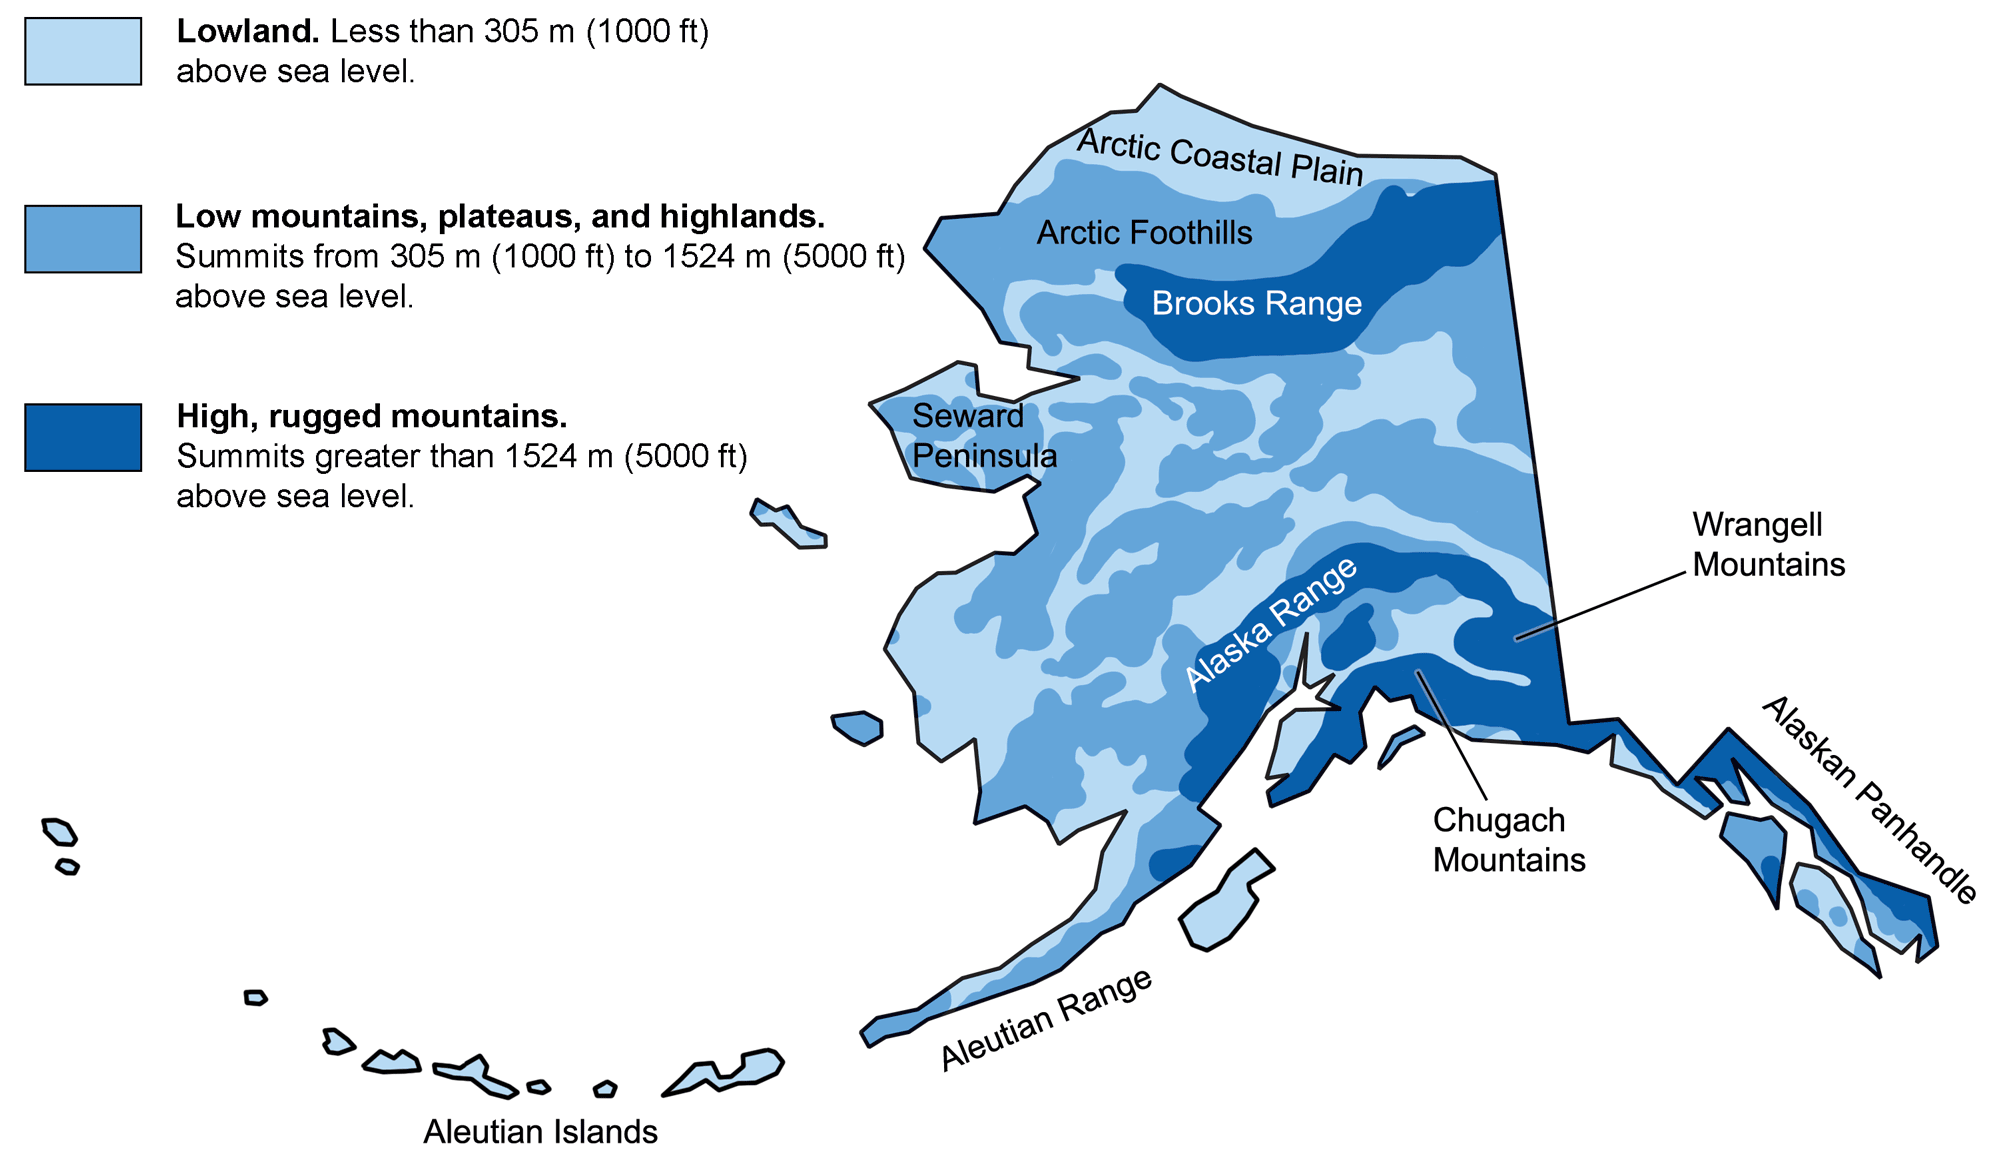 Map of Alaska that highlights the major physiographic regions of the state.